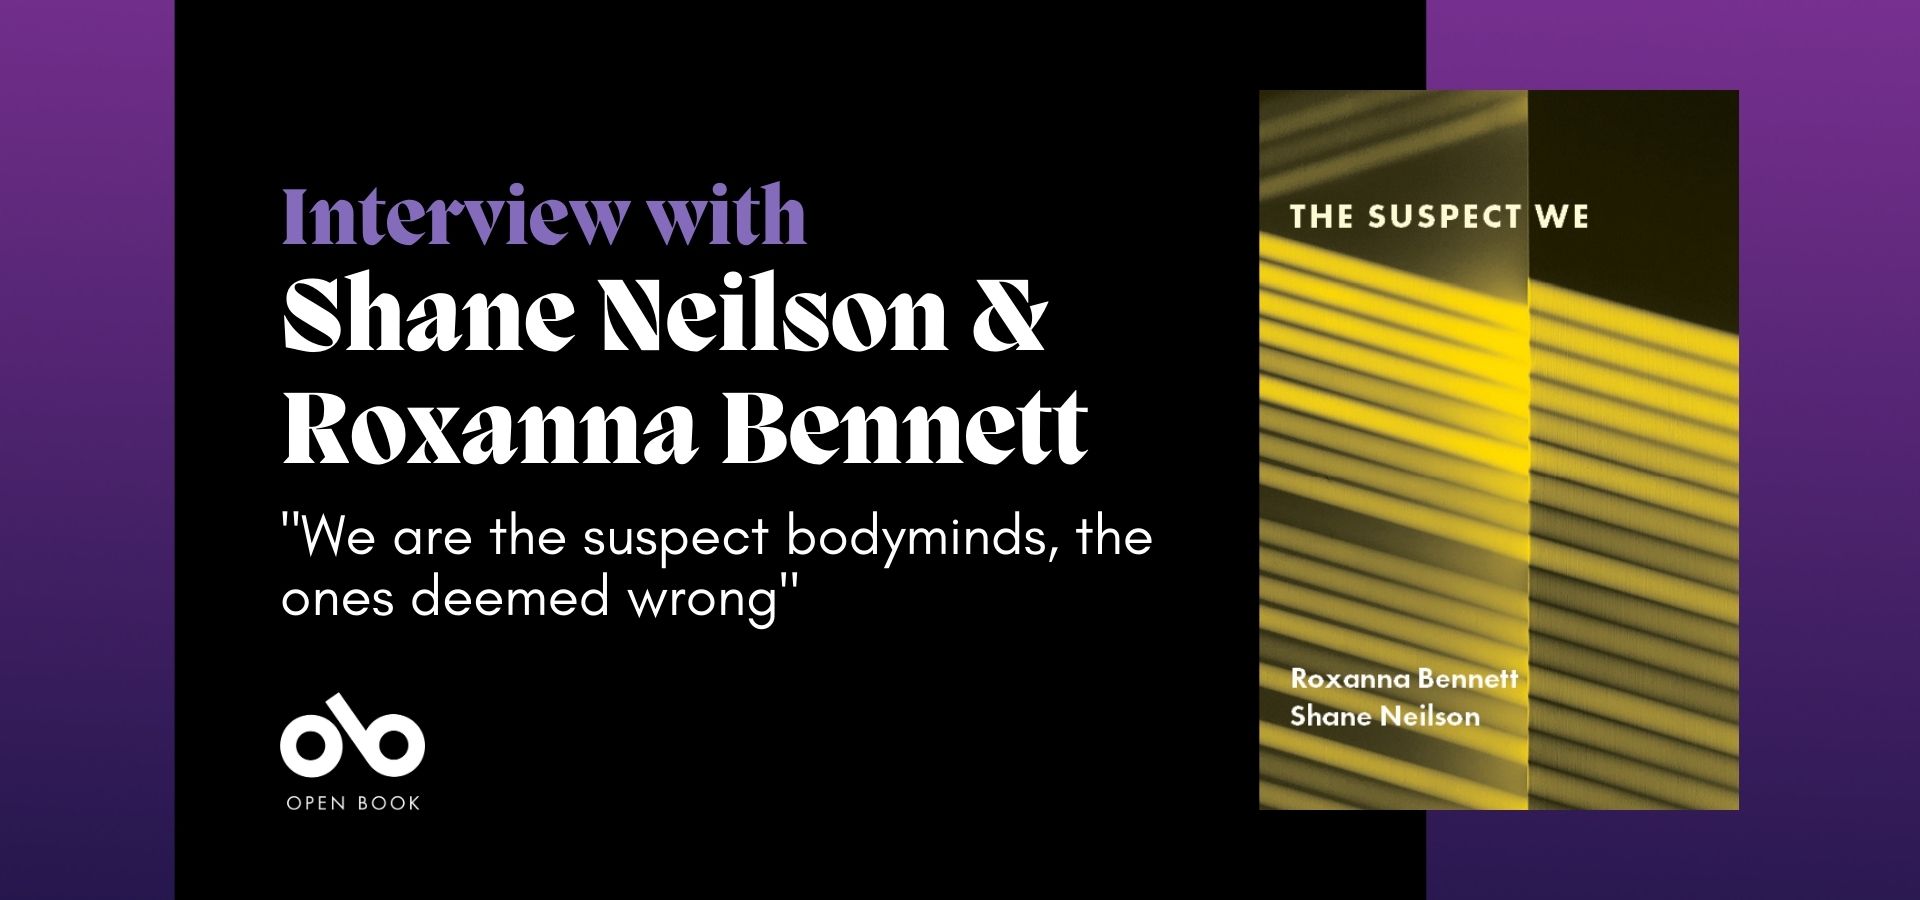 purple and black banner image with the cover of The Suspect We by Shane Neilson and Roxanna Bennett. Text reads "Interview with Shane Neilson & Roxanna Bennett" and "We are the suspect bodyminds, the ones deemed wrong". Open Book logo bottom left